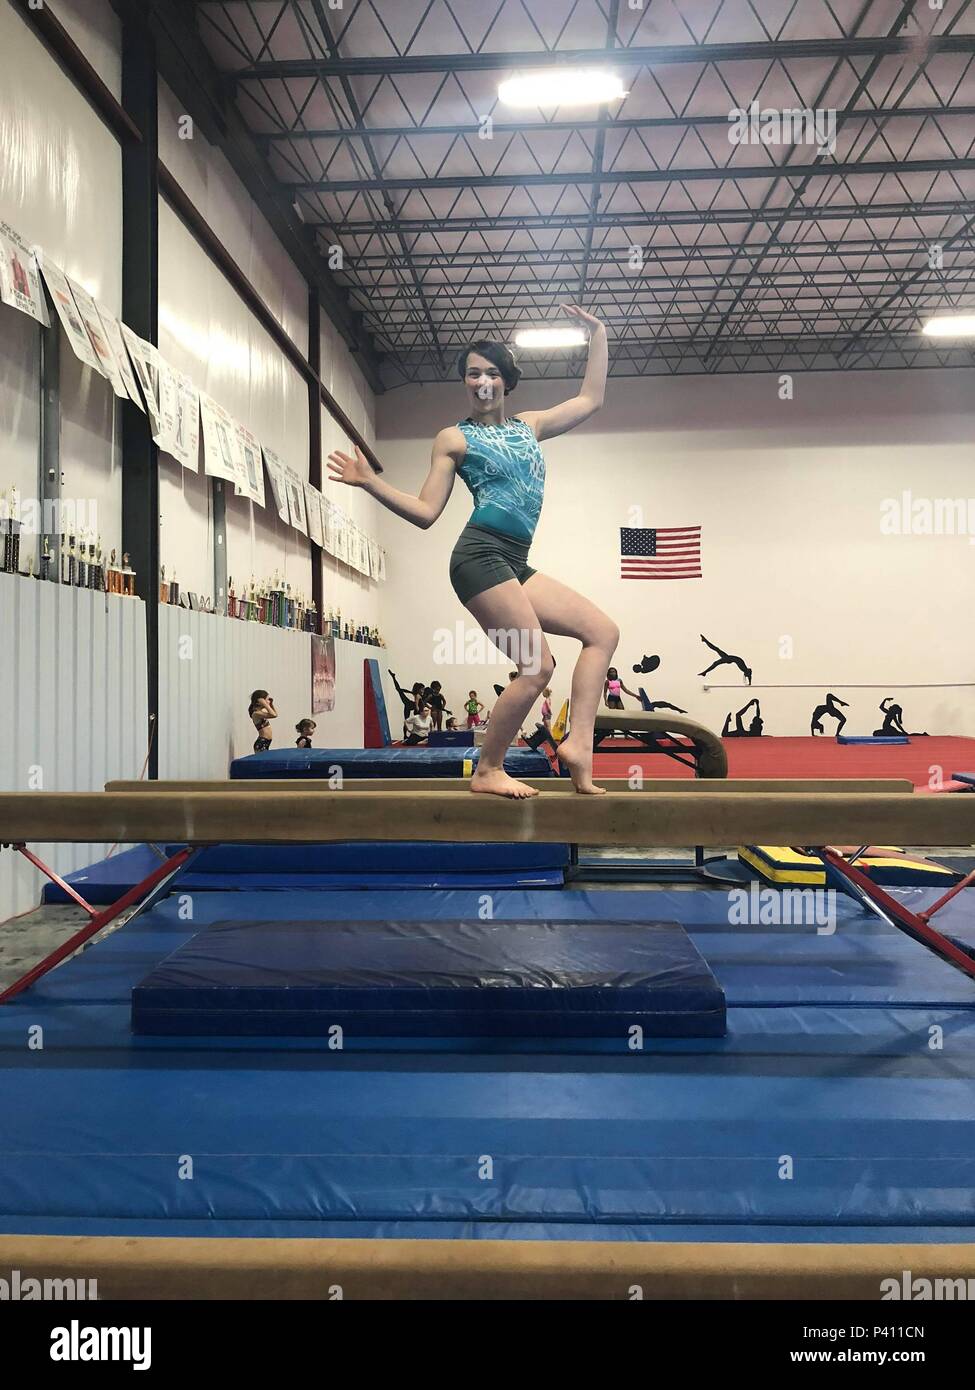 Character Development Academy (SLCDA) selectee Meghan Fox posing on a beam in gymnastics gym, Hagerstown, Maryland, May 23, 2018. Image courtesy Sgt. Kimberlyn Adams / 4th Marine Corps District. () Stock Photo